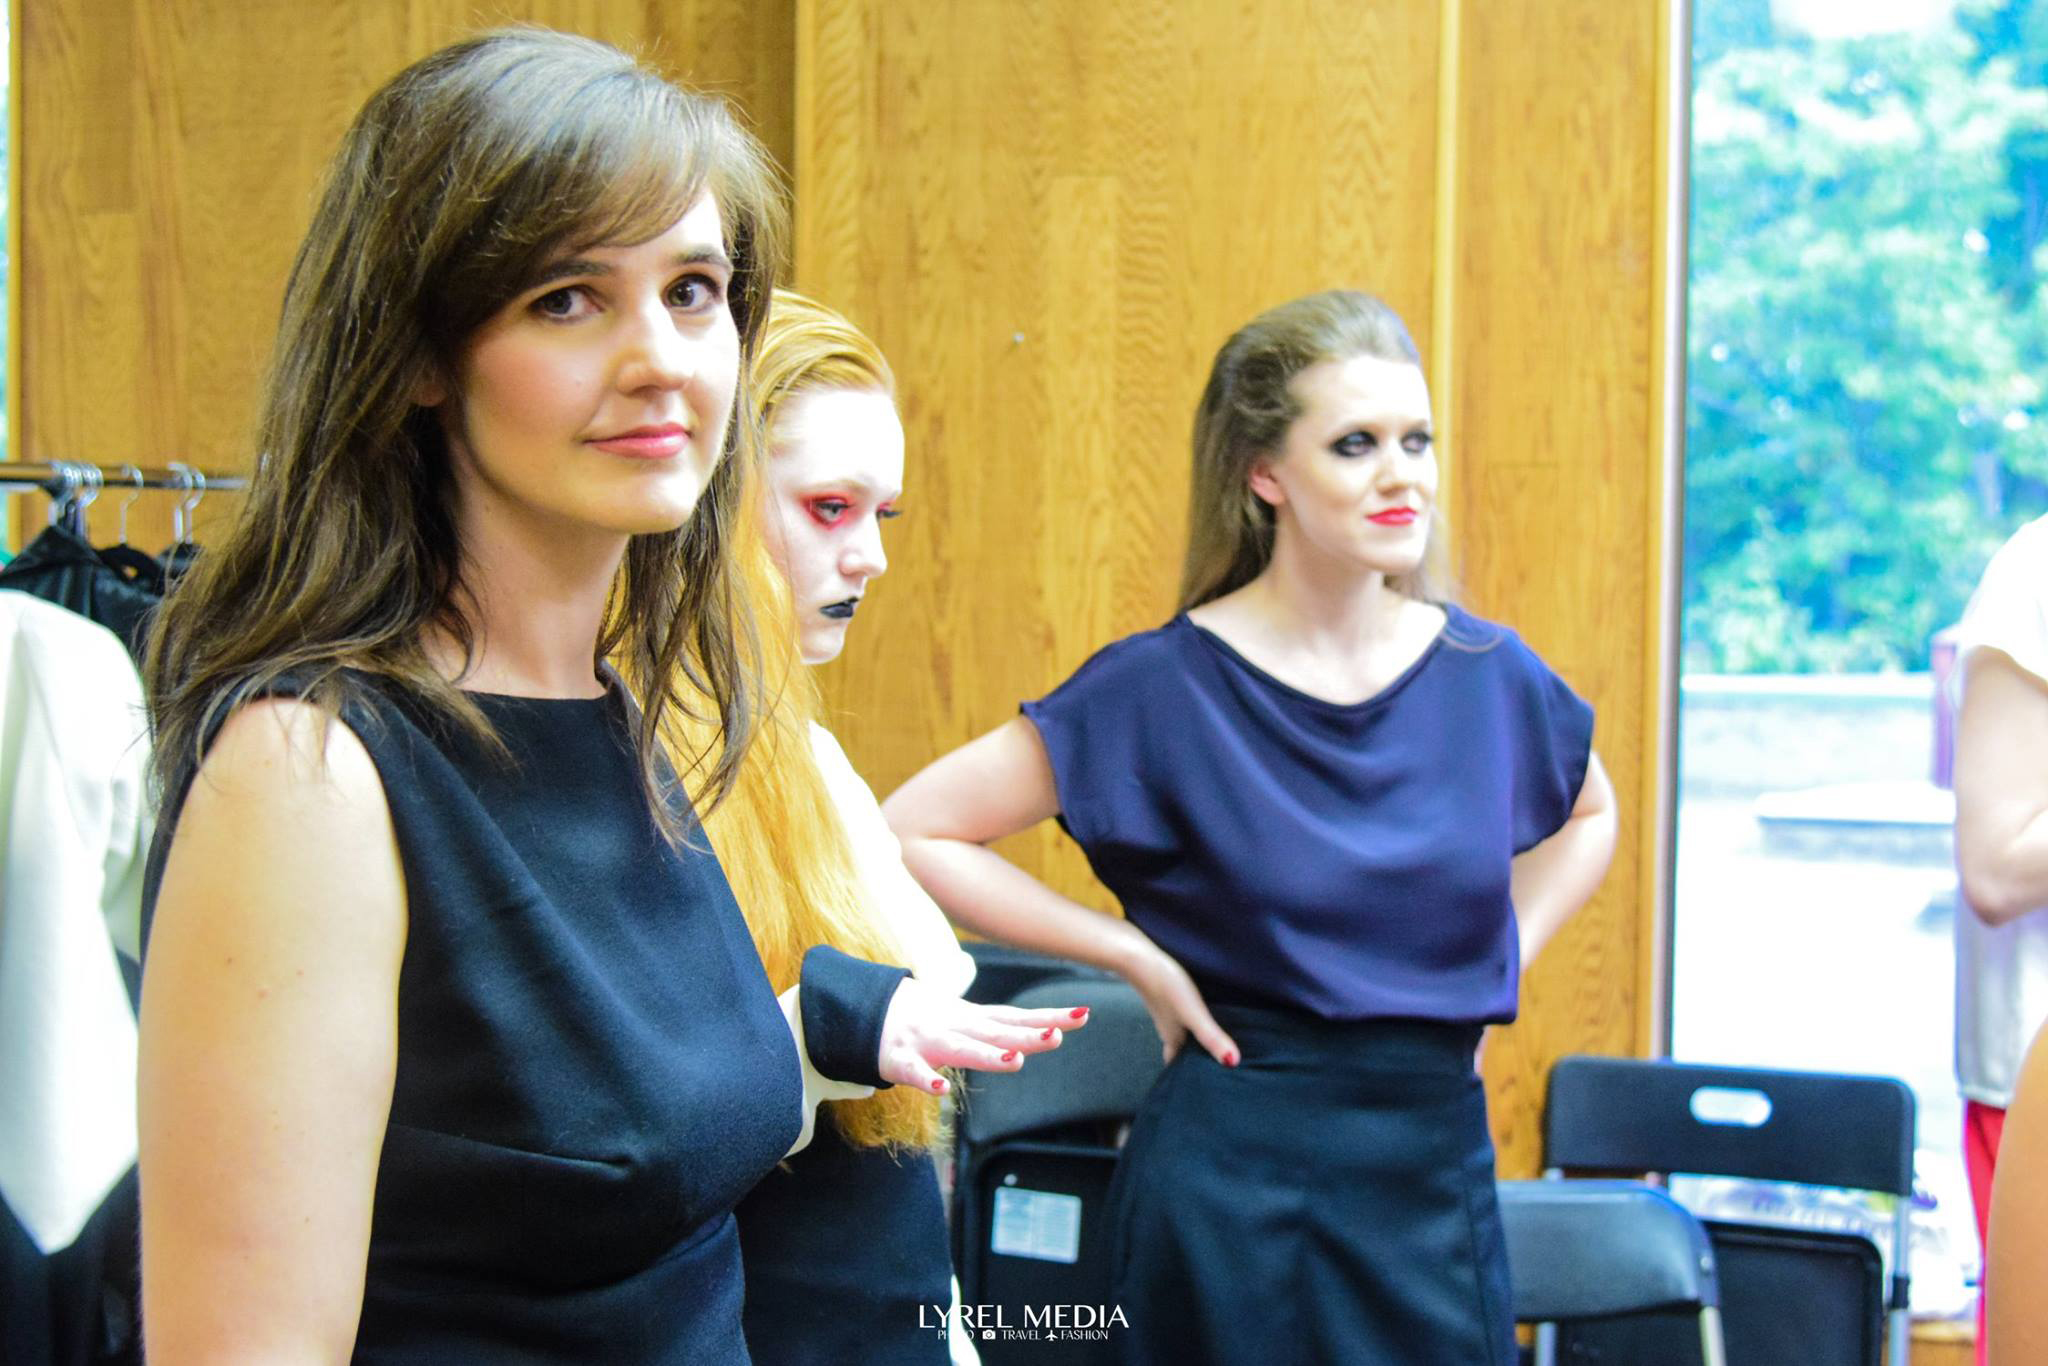 Behind The Scenes: Jennifer with her models before the show.